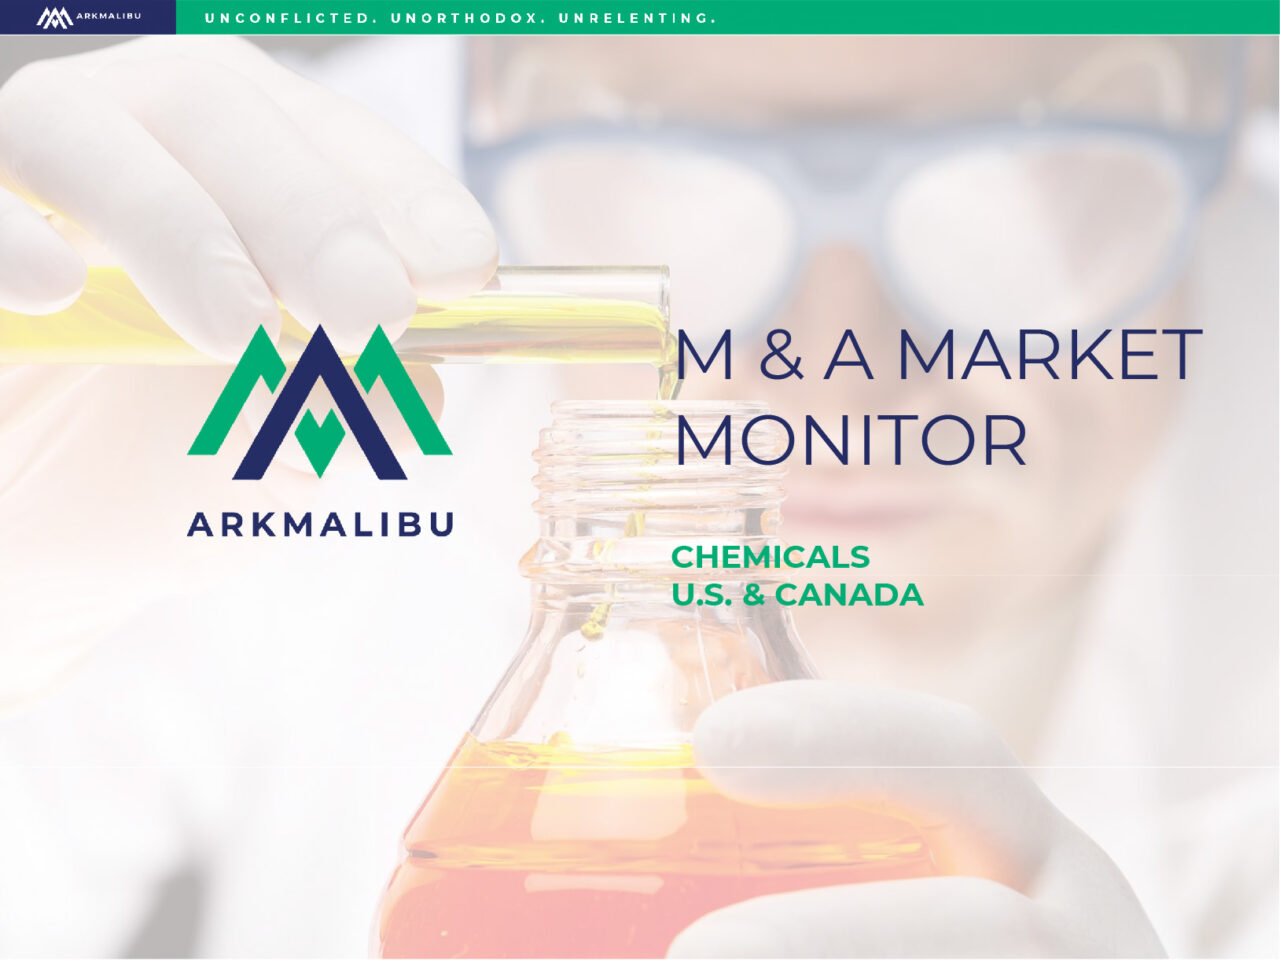 Market Monitor Cover for Chemicals. Faded Image of a person pouring chemicals into a container in the background